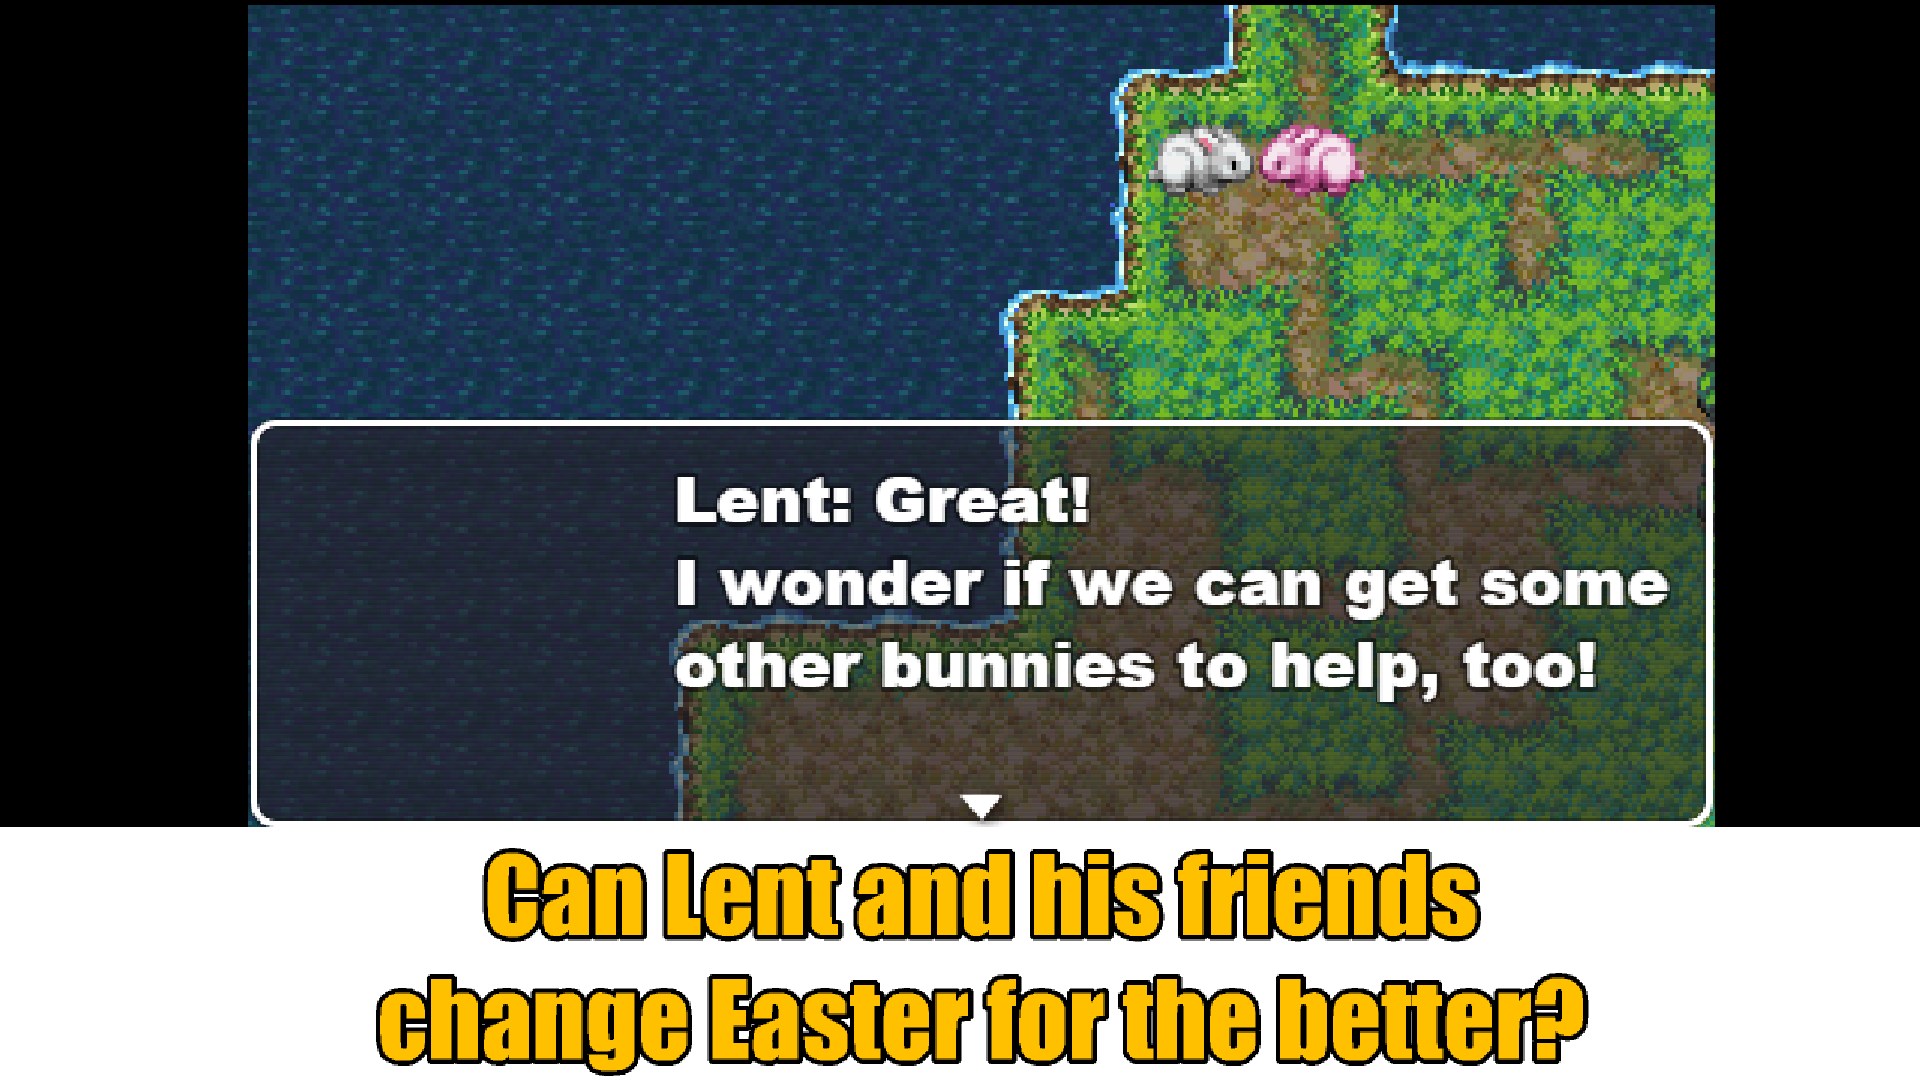 Buy Lent: The Easter Bunny (Story Two) - Microsoft Store en-GG